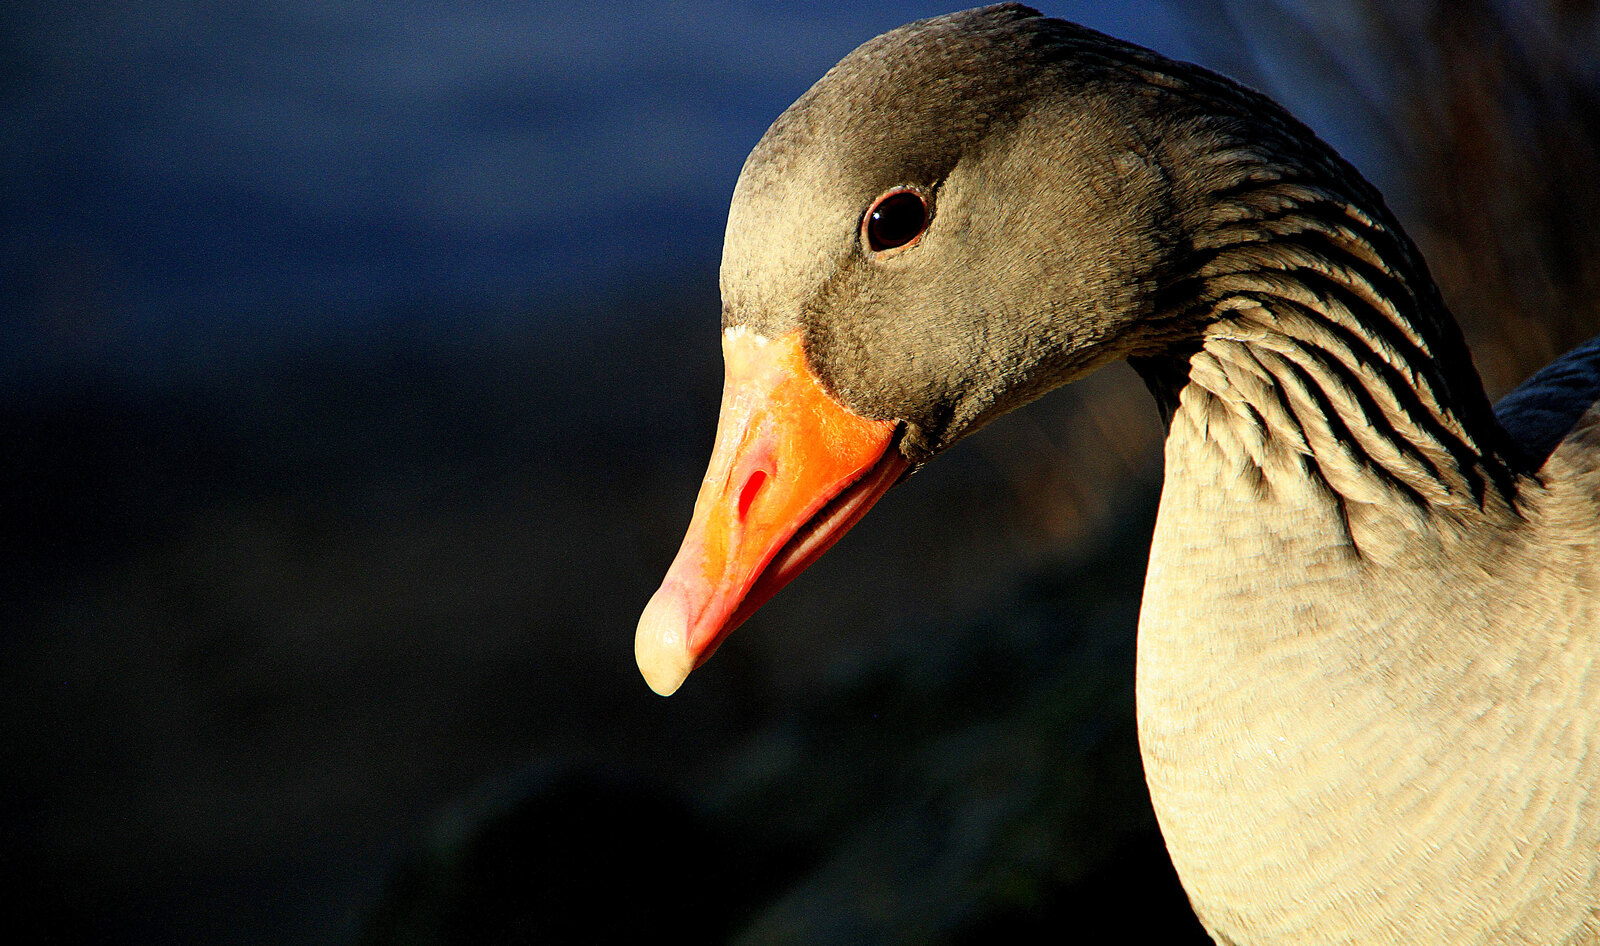 BREAKING: NYC Becomes Largest City in the World to Ban Foie Gras